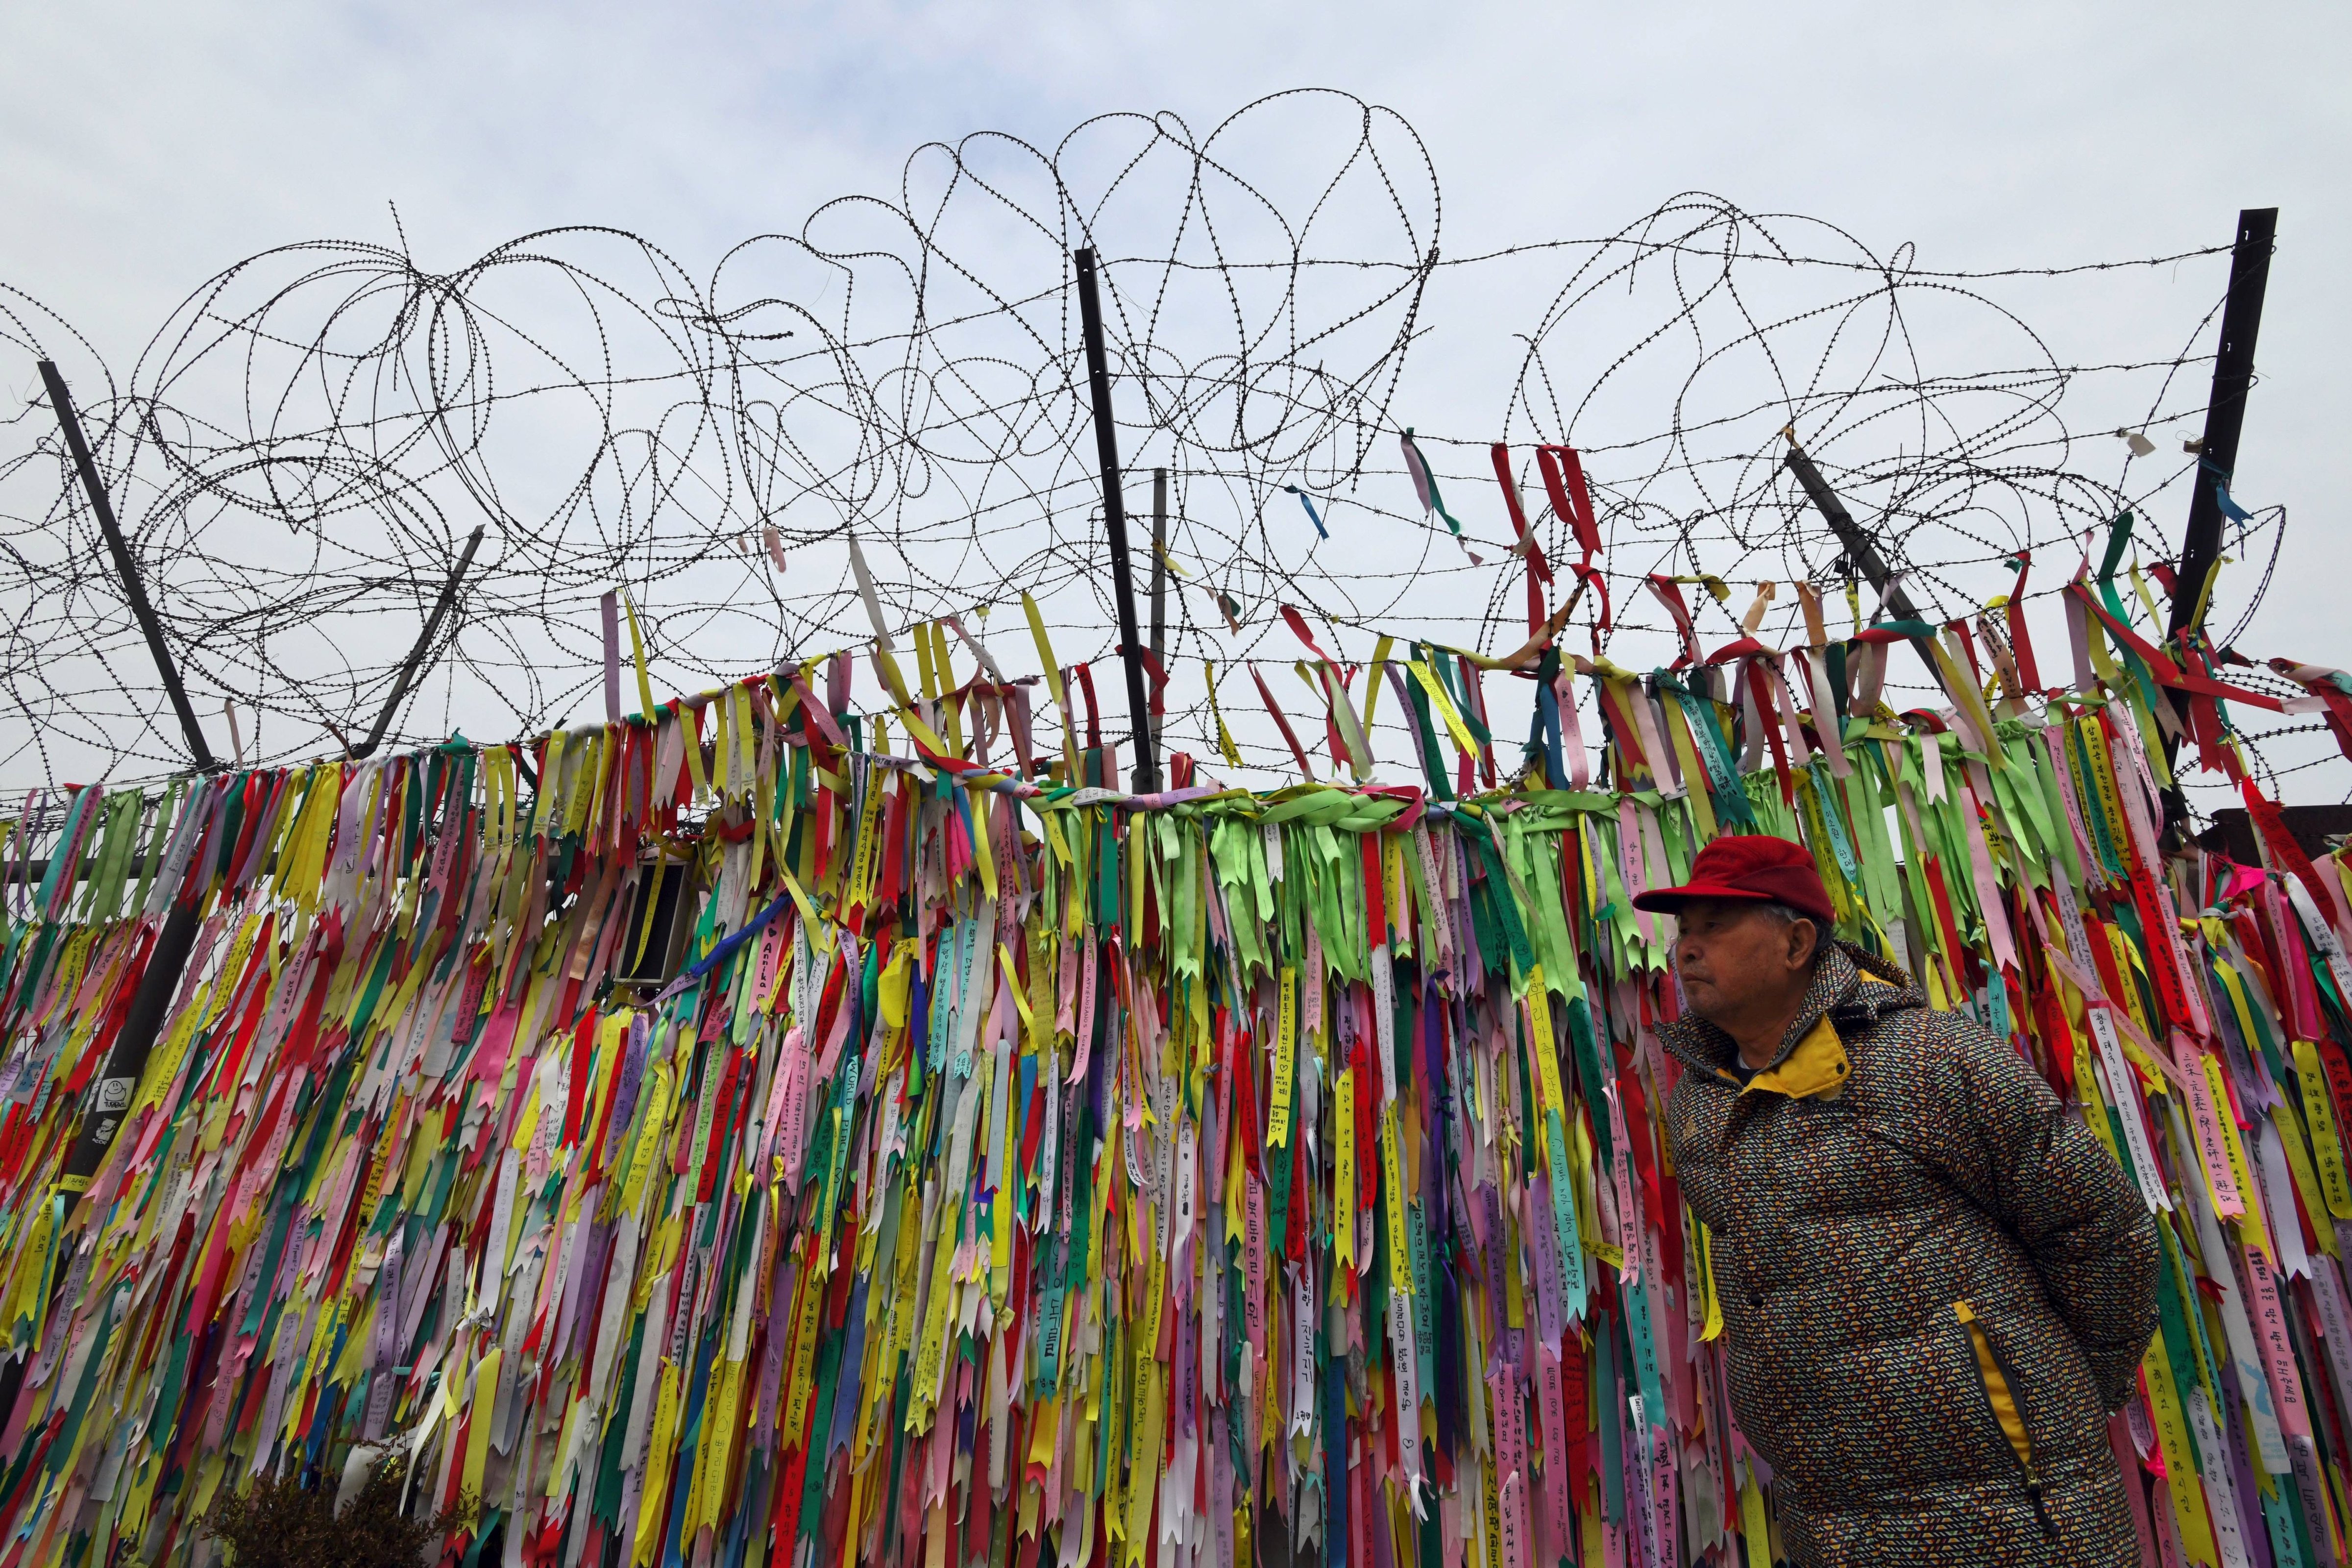 A man walks past a military fence covered with ribbons calling for peace and reunification at the Imjingak peace park near the Demilitarized Zone (DMZ) dividing the two Koreas at the border city of Paju on Jan. 8, 2018. (Jung Yeon-Je—AFP/Getty Images)